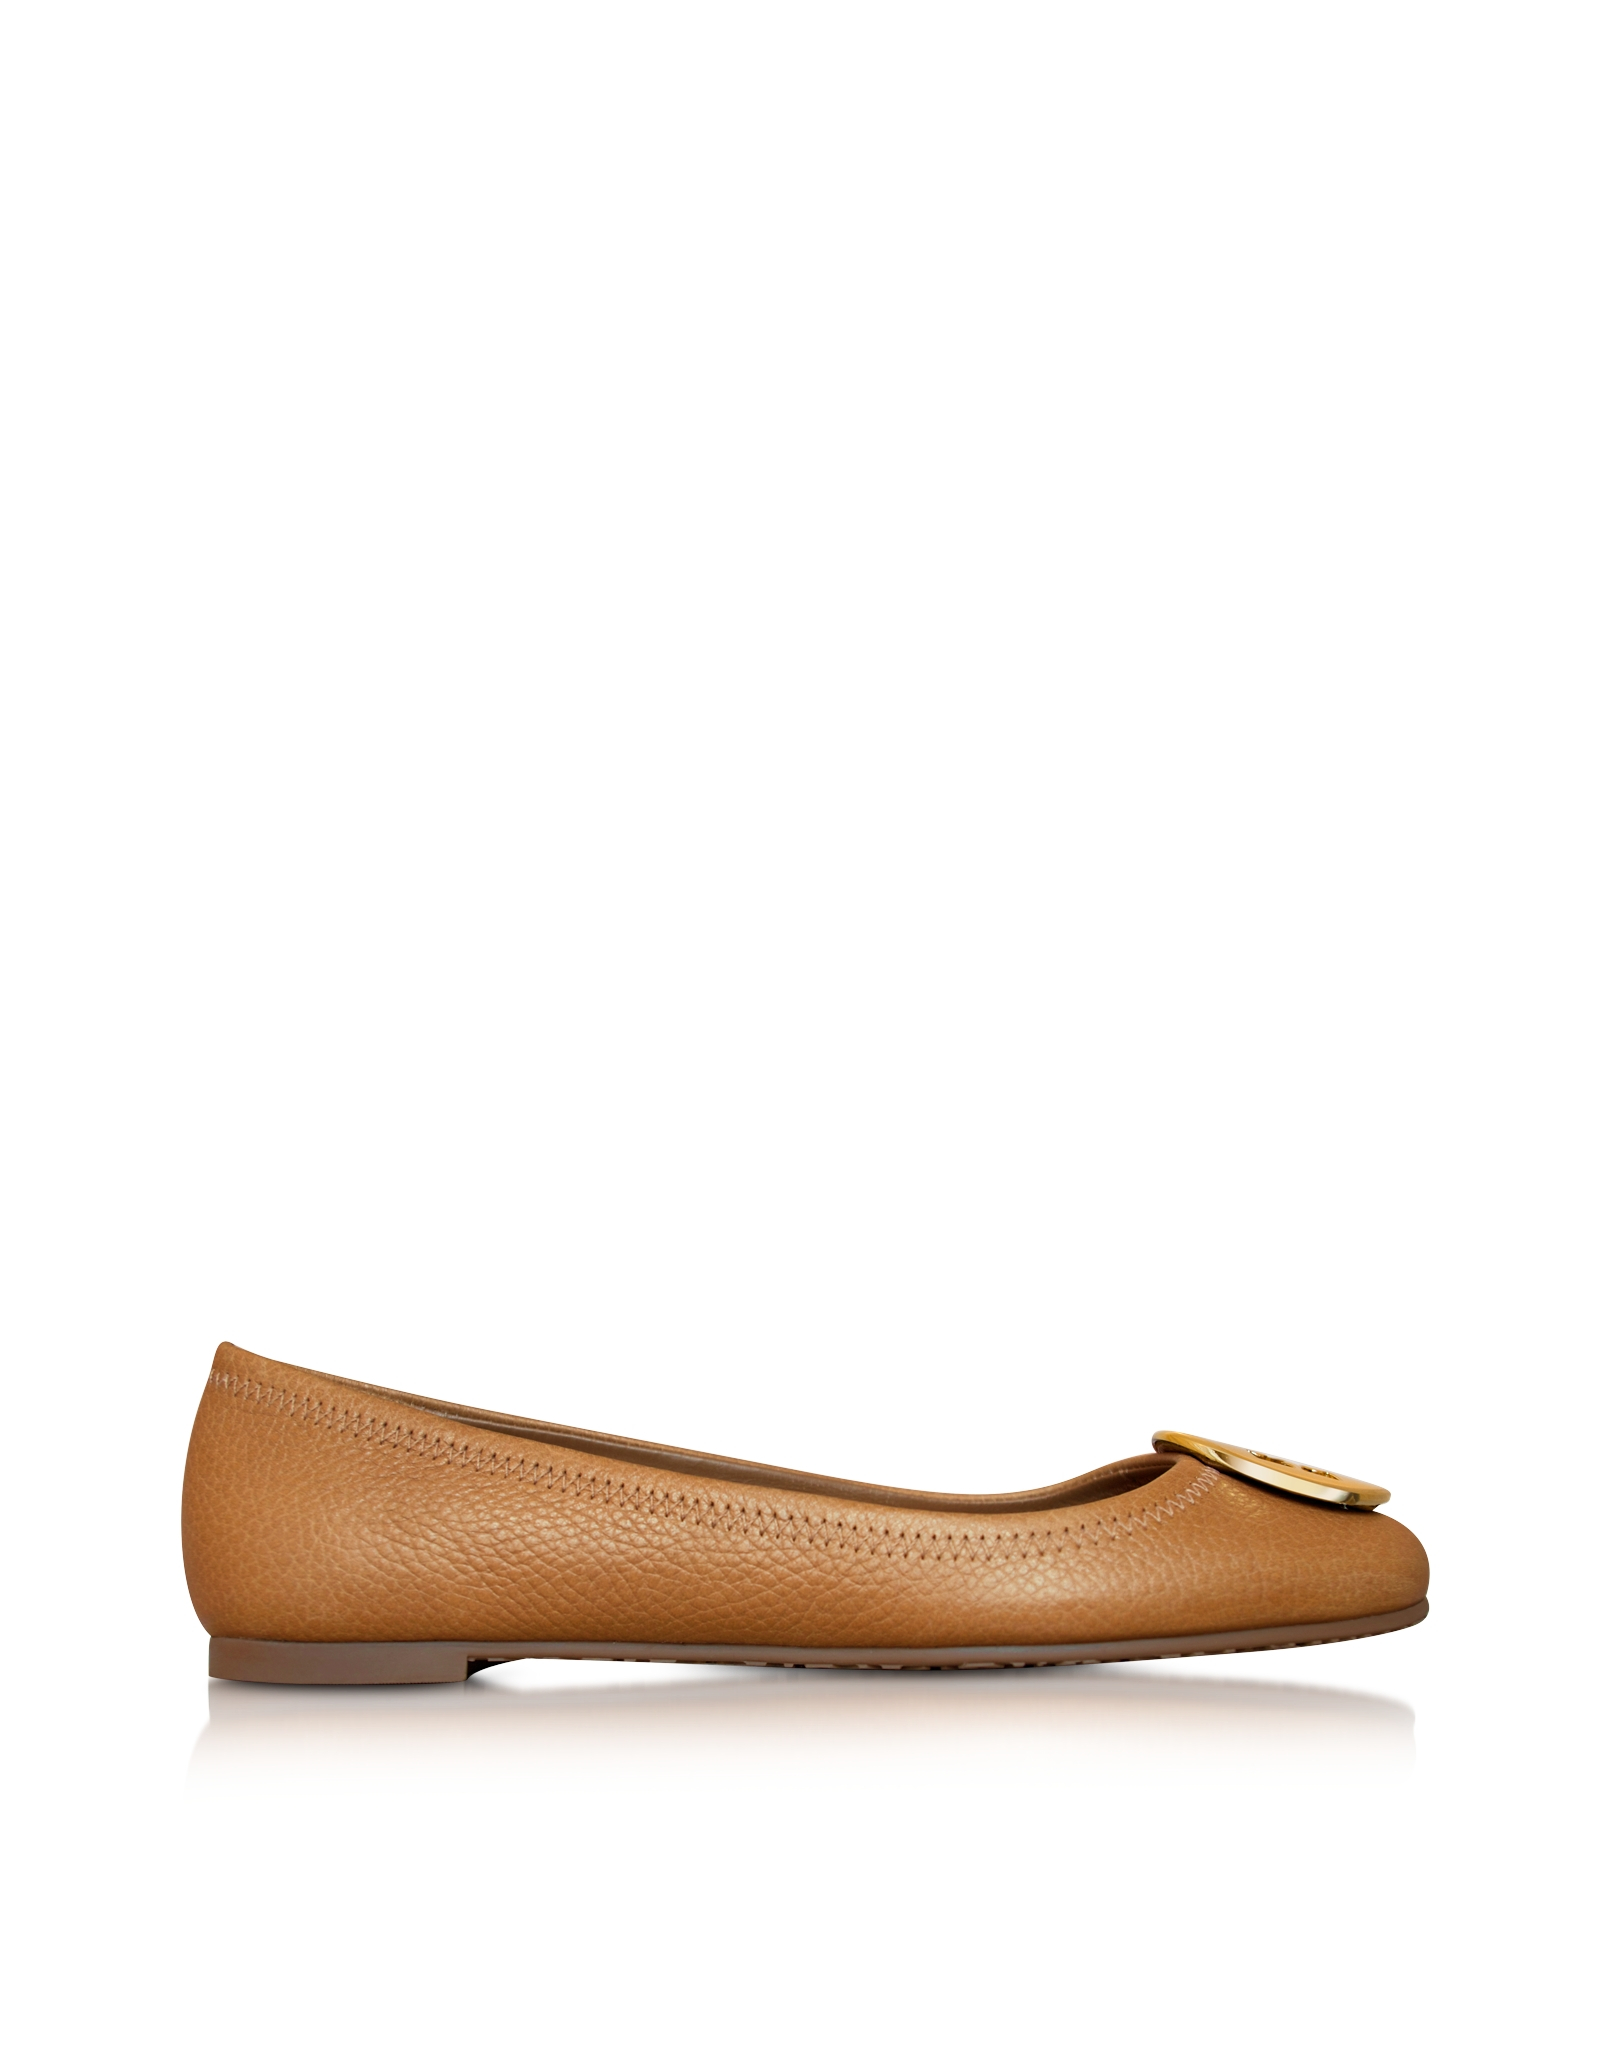 Tory burch Reva Tumbled Leather Ballet Flat in Brown | Lyst